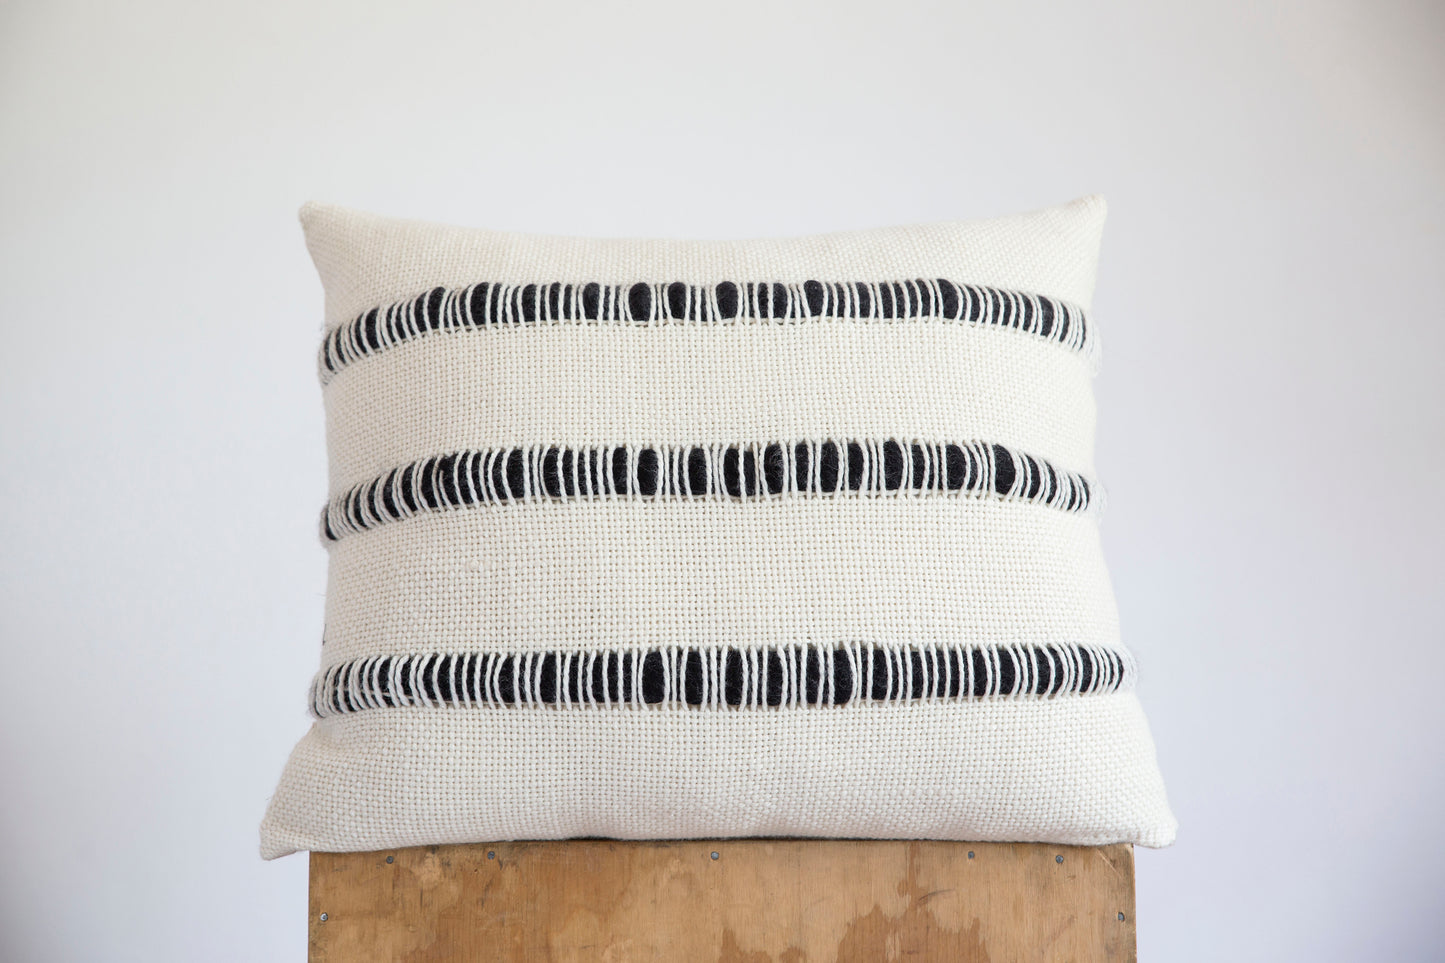 Ivory textured pillow cover handwoven in merino wool with roving stripes in black 19x23